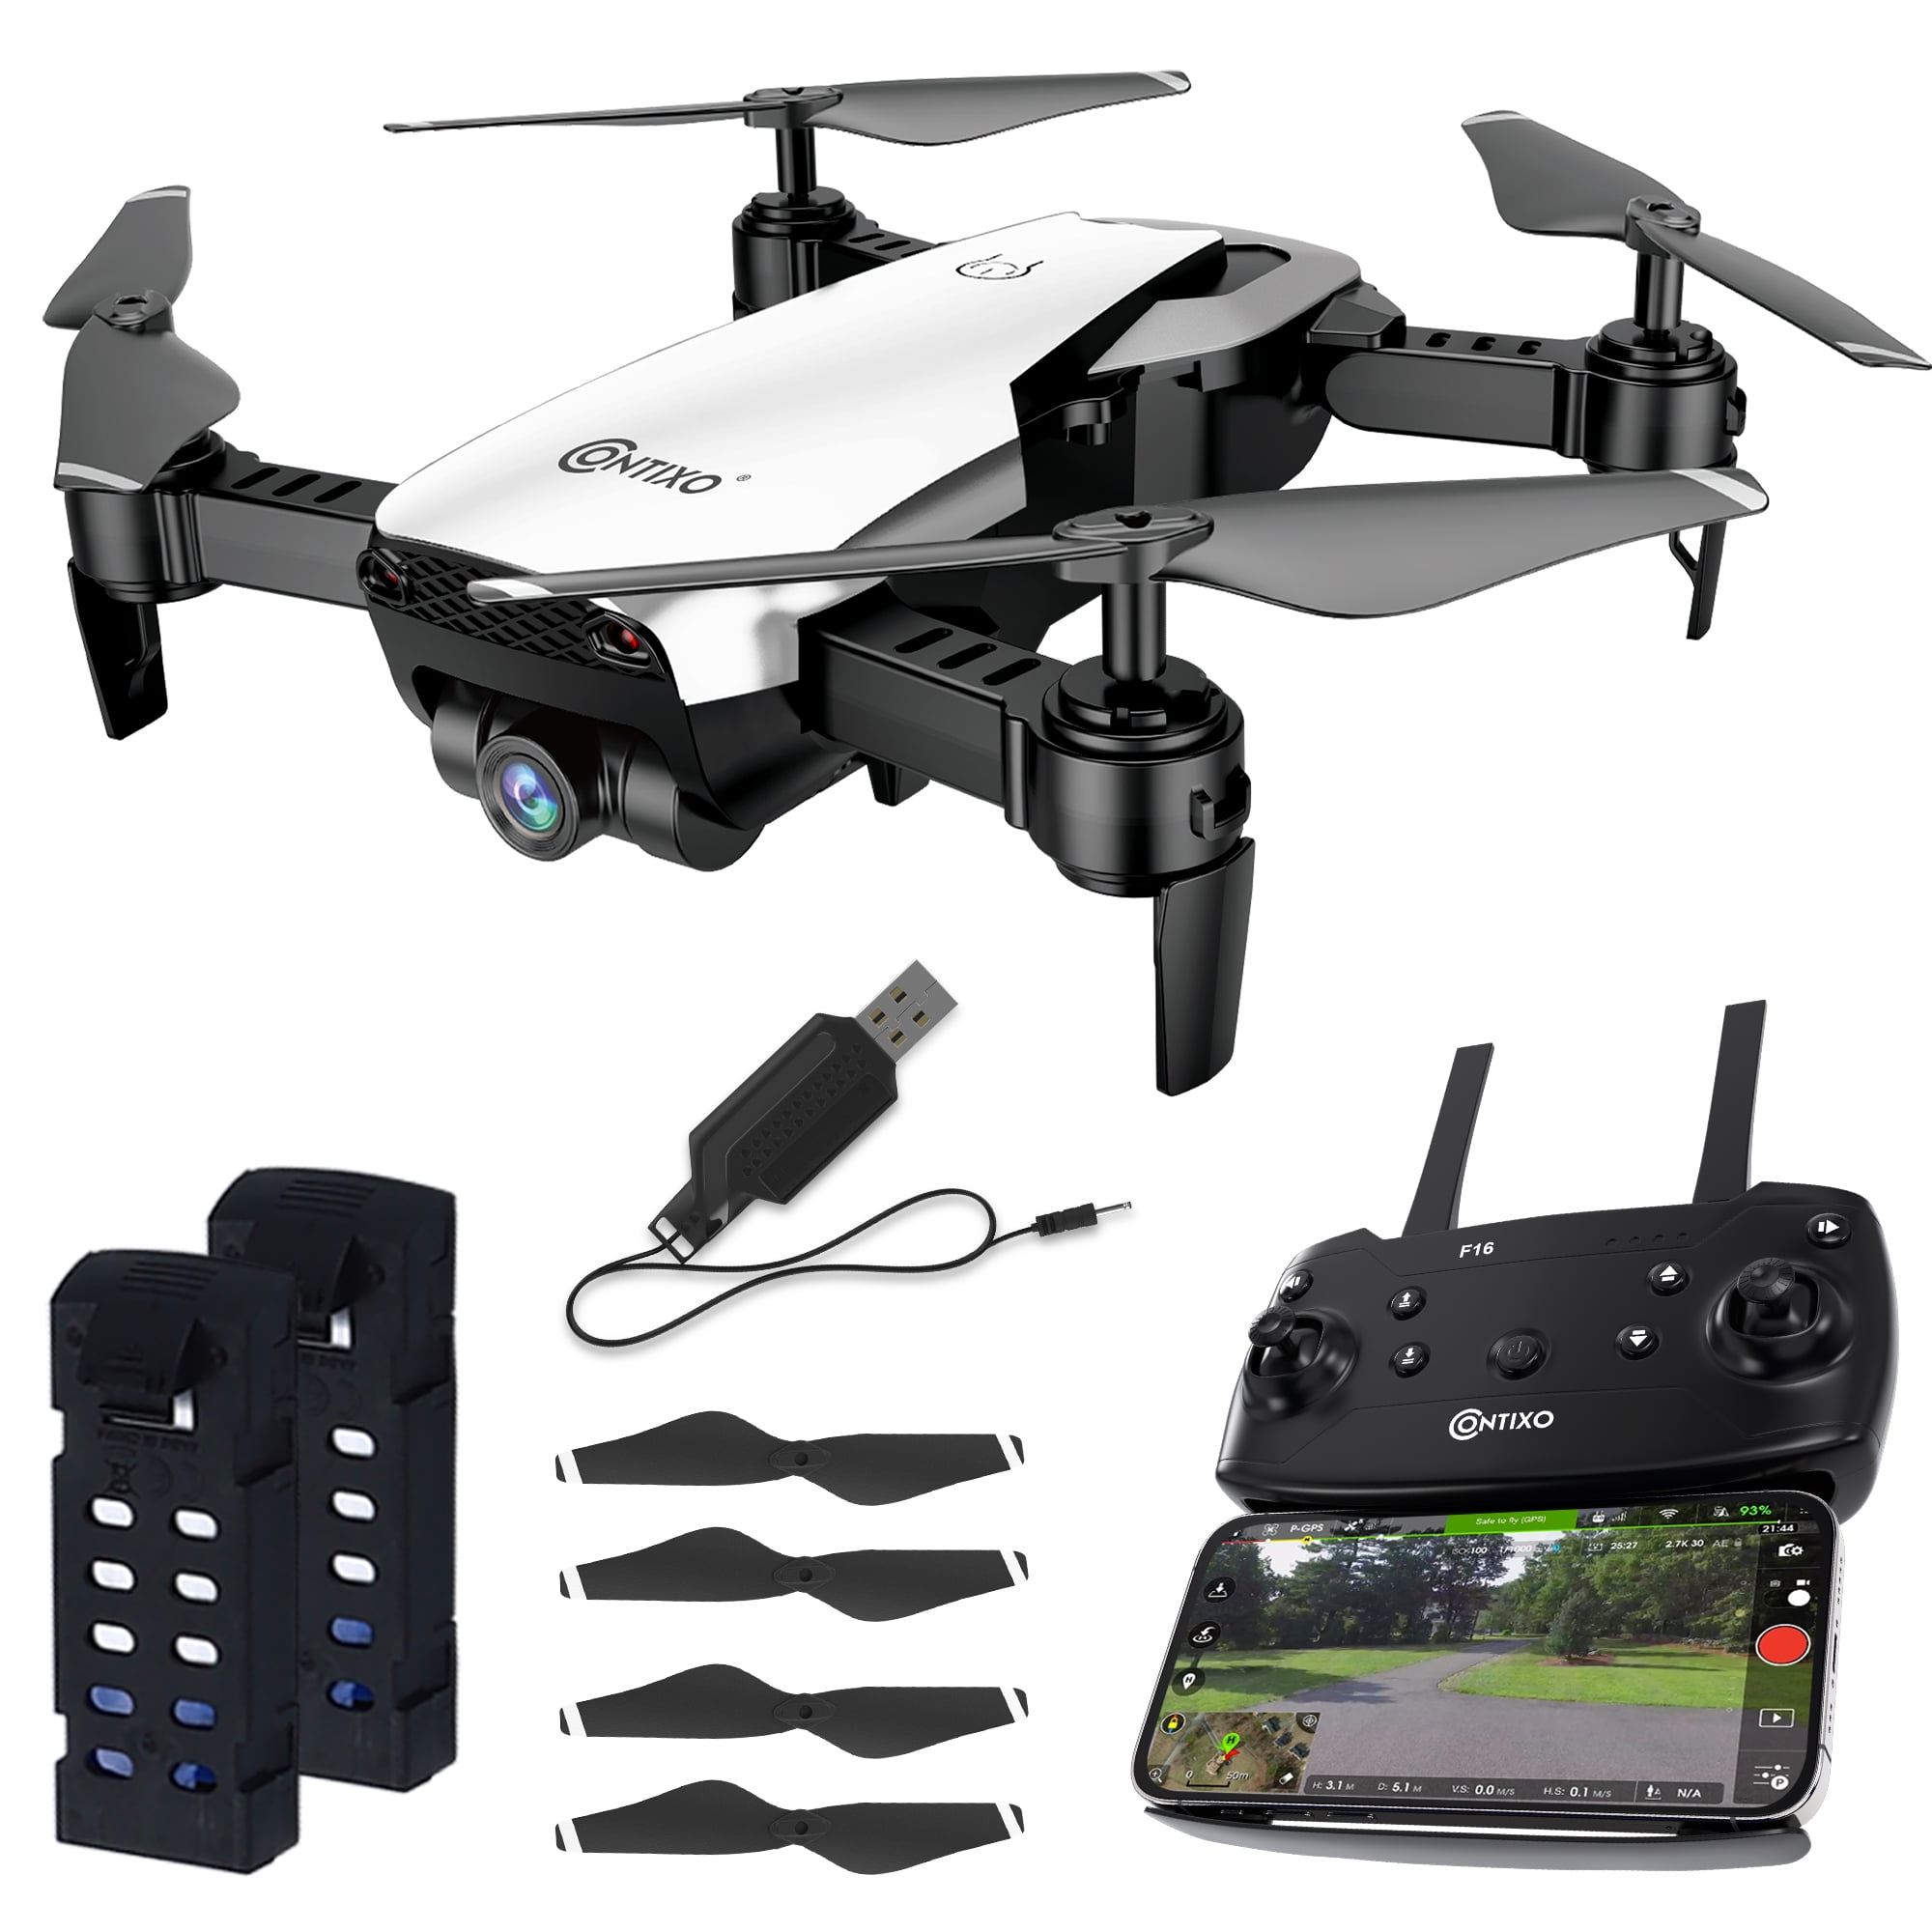 Drone X Pro Foldable Quadcopter WIFI FPV with 1080P HD Camera 3 Extra new 